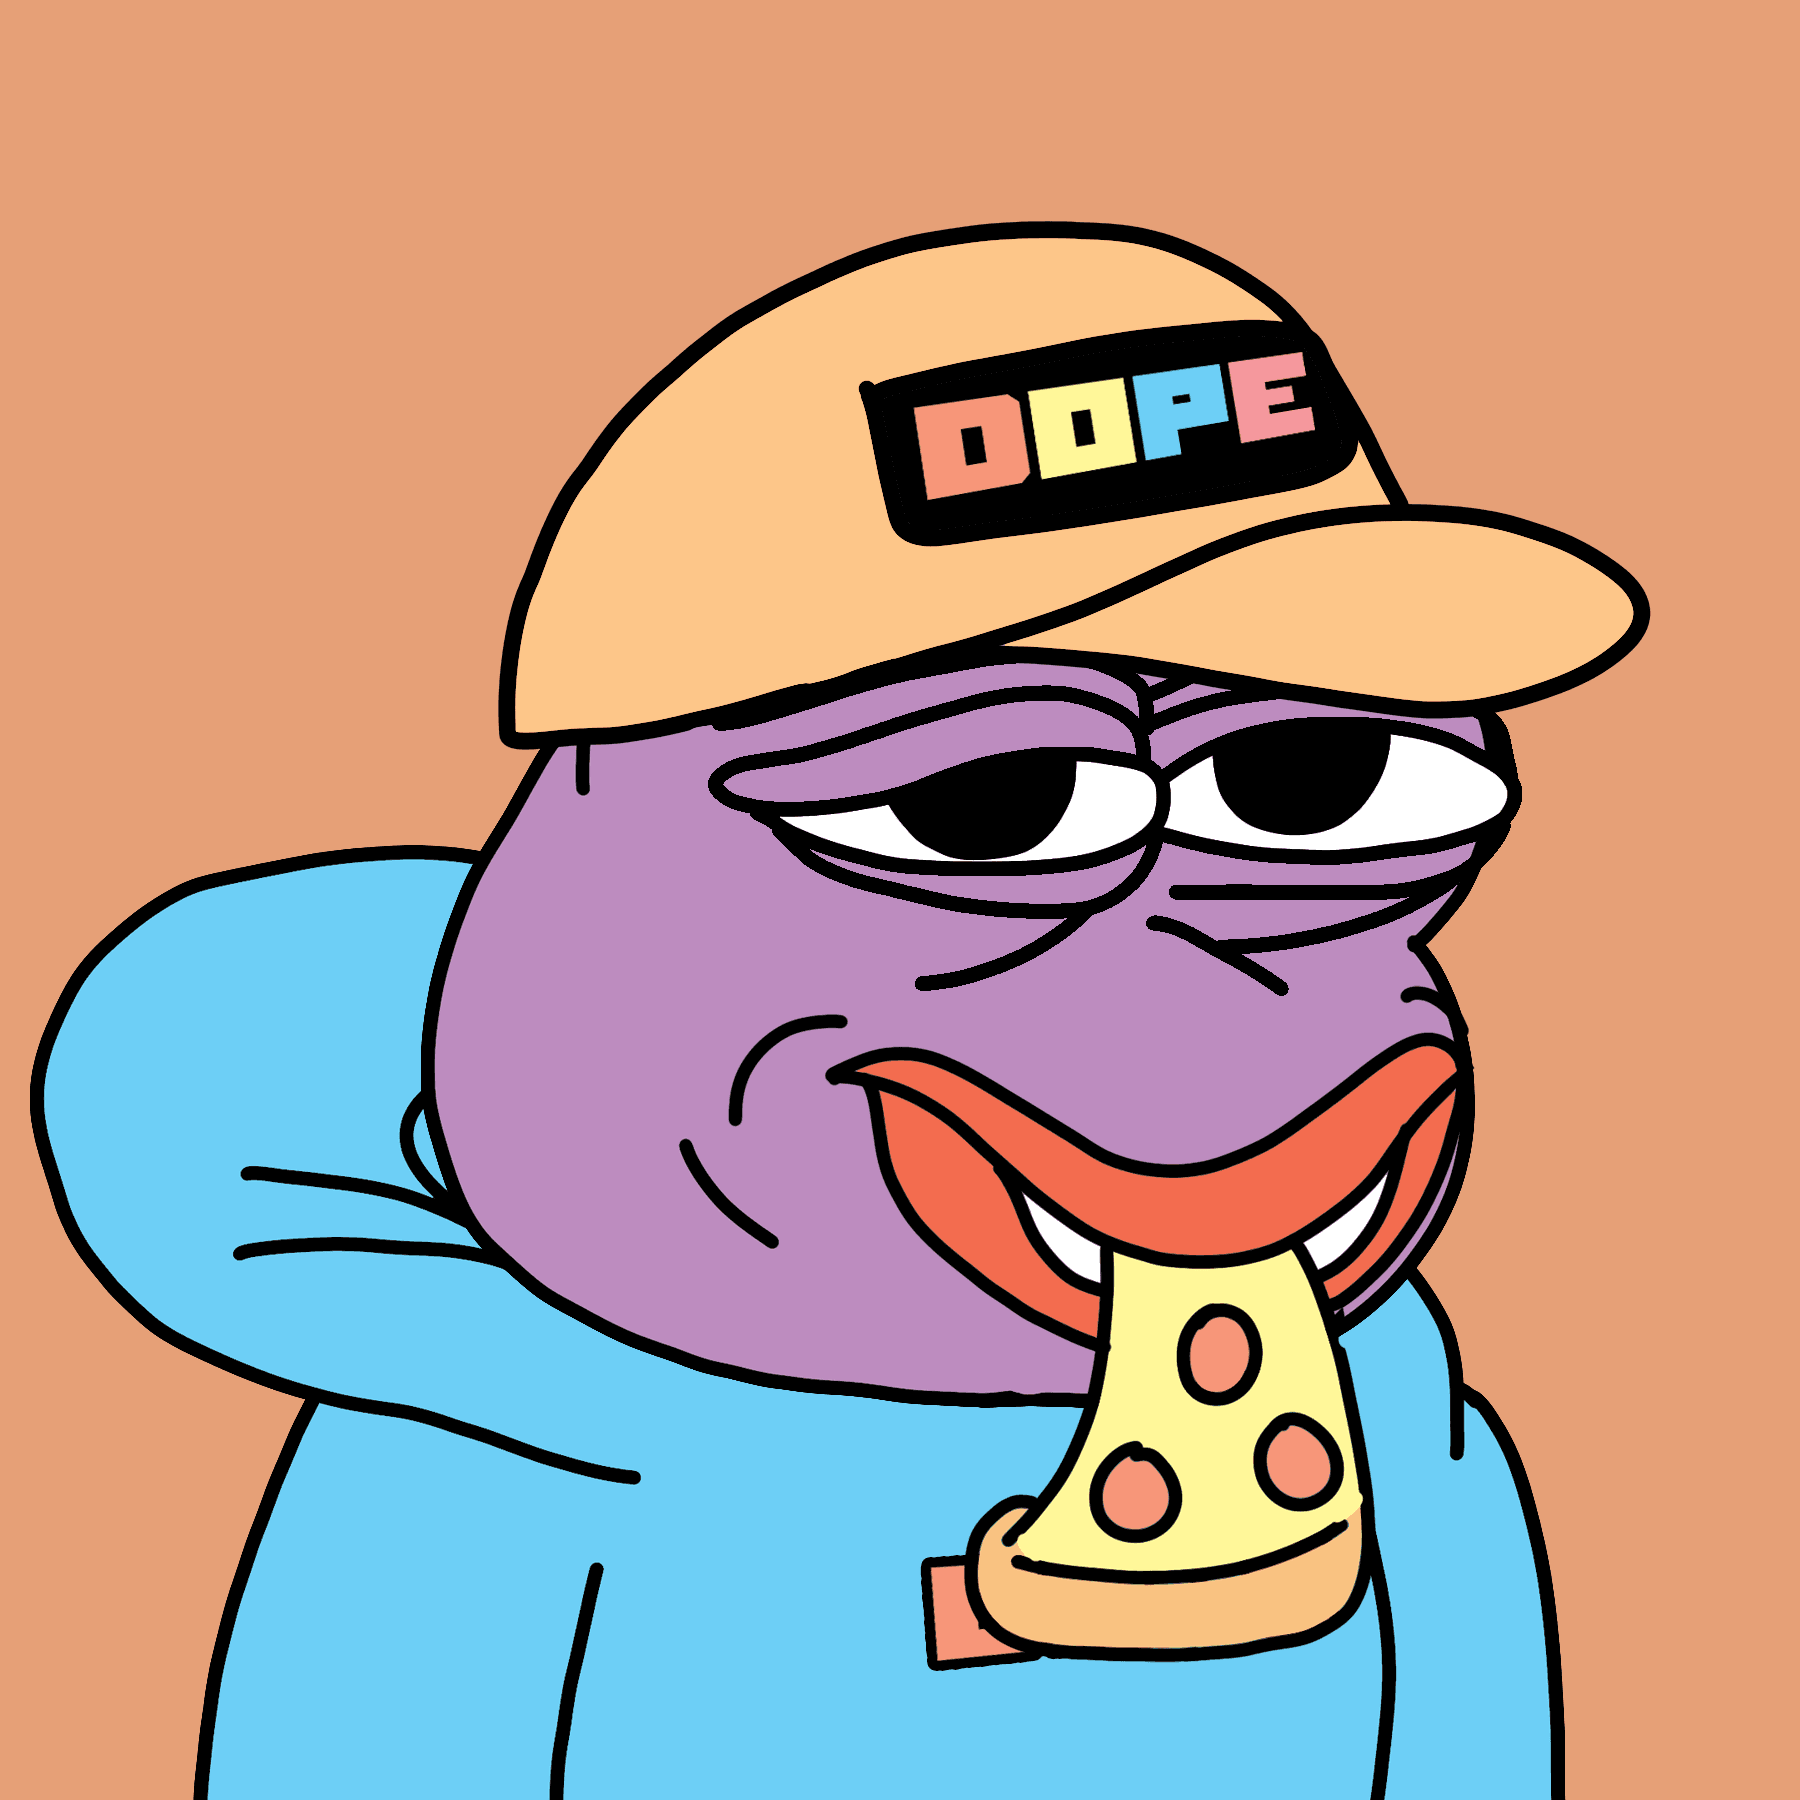 DOPE - Doodle Pepe #6993